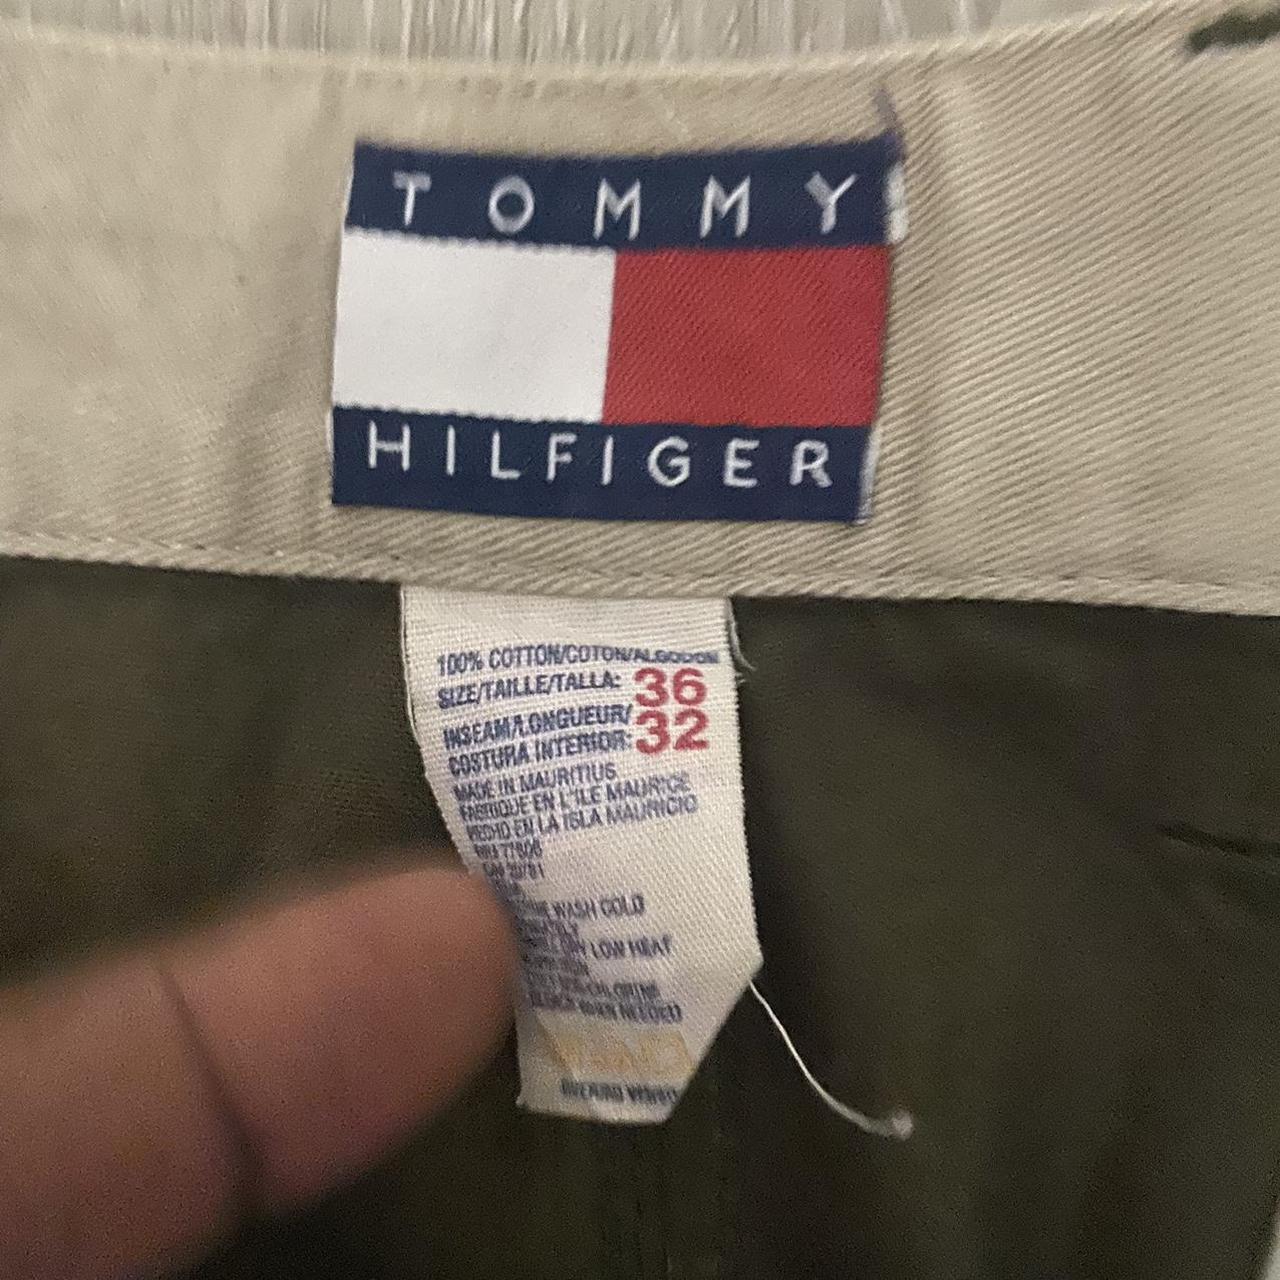 Product Image 4 - Vintage Tommy Hilfiger pants 36x32
In